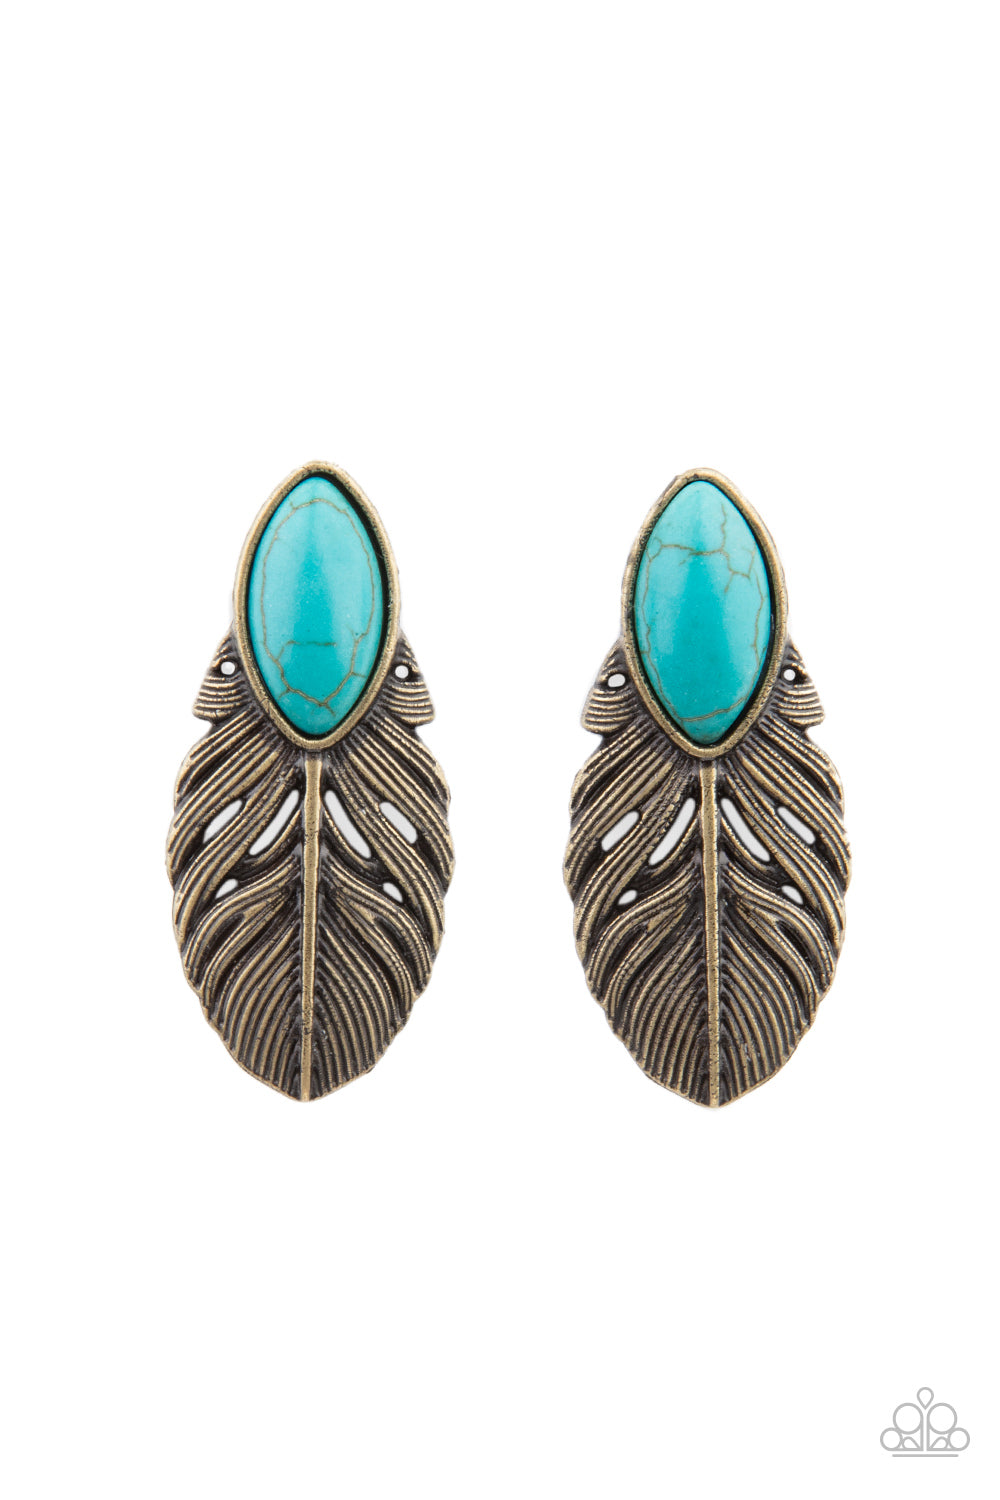 Rural Roadrunner - Brass Turquoise Earrings - Paparazzi Accessories